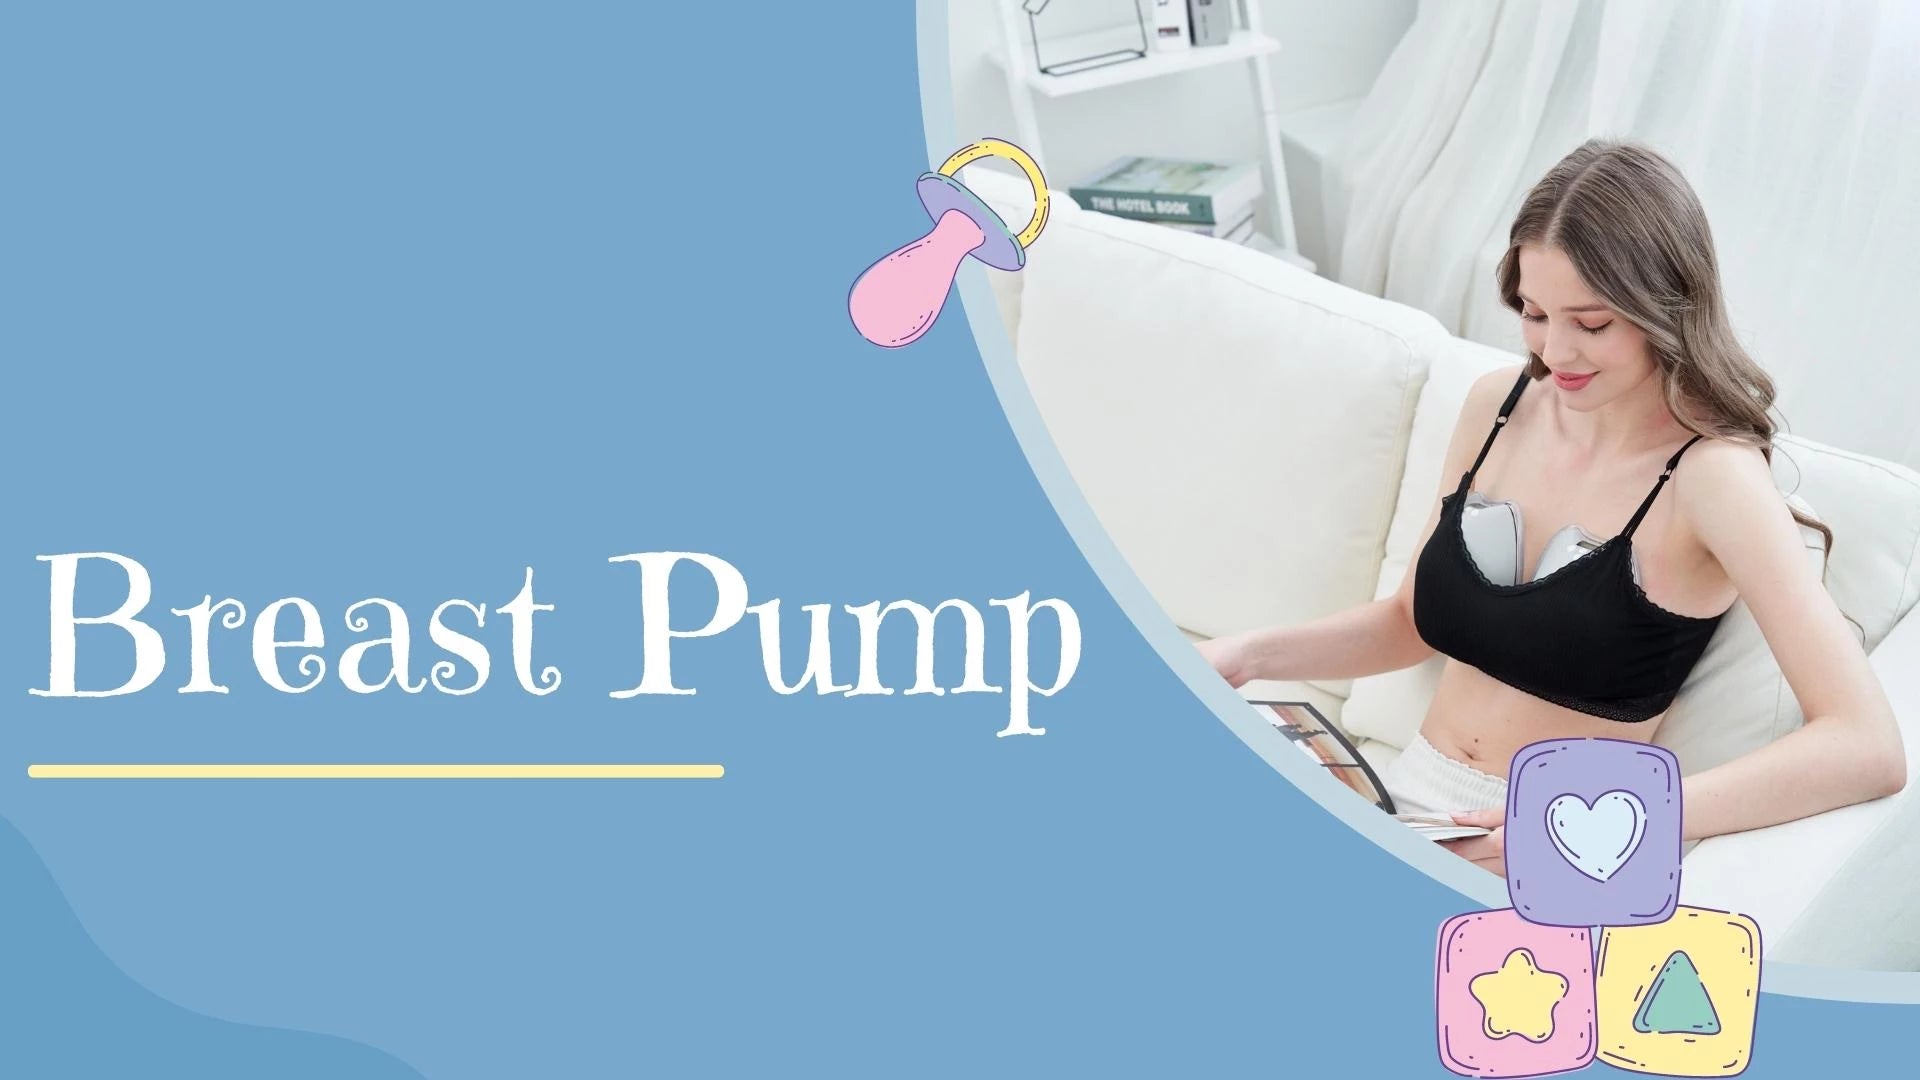 Baby's on Broadway - New to Baby's on Broadway! @elvie breast pumps!  Silent, wearable, cordless, tube-less breast pumps? And the pump and  accessories are FSA eligible? Yes please! Come on in! We'd